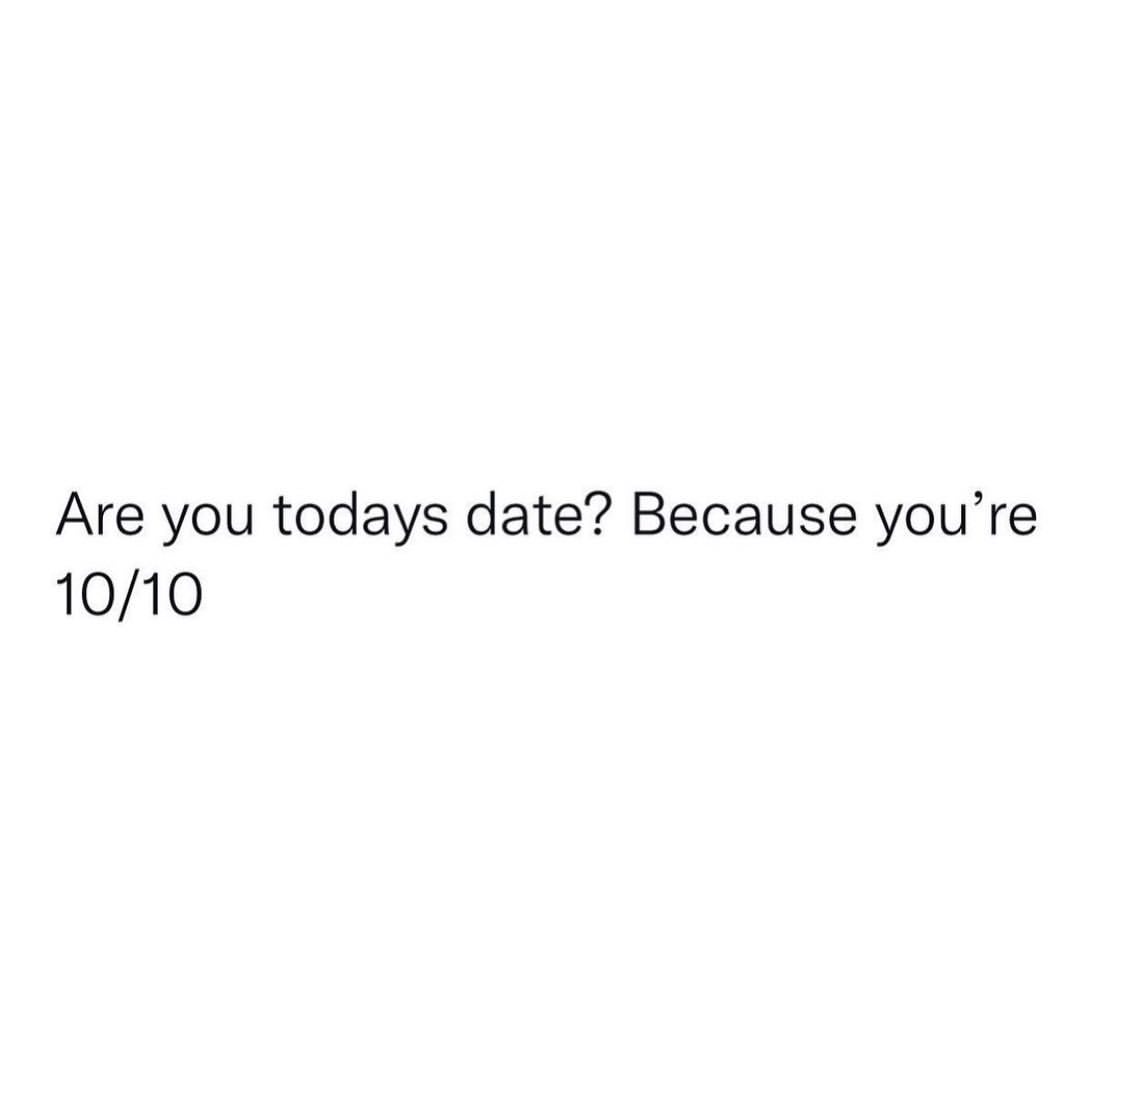 Are you todays date? Because you're 10/10.